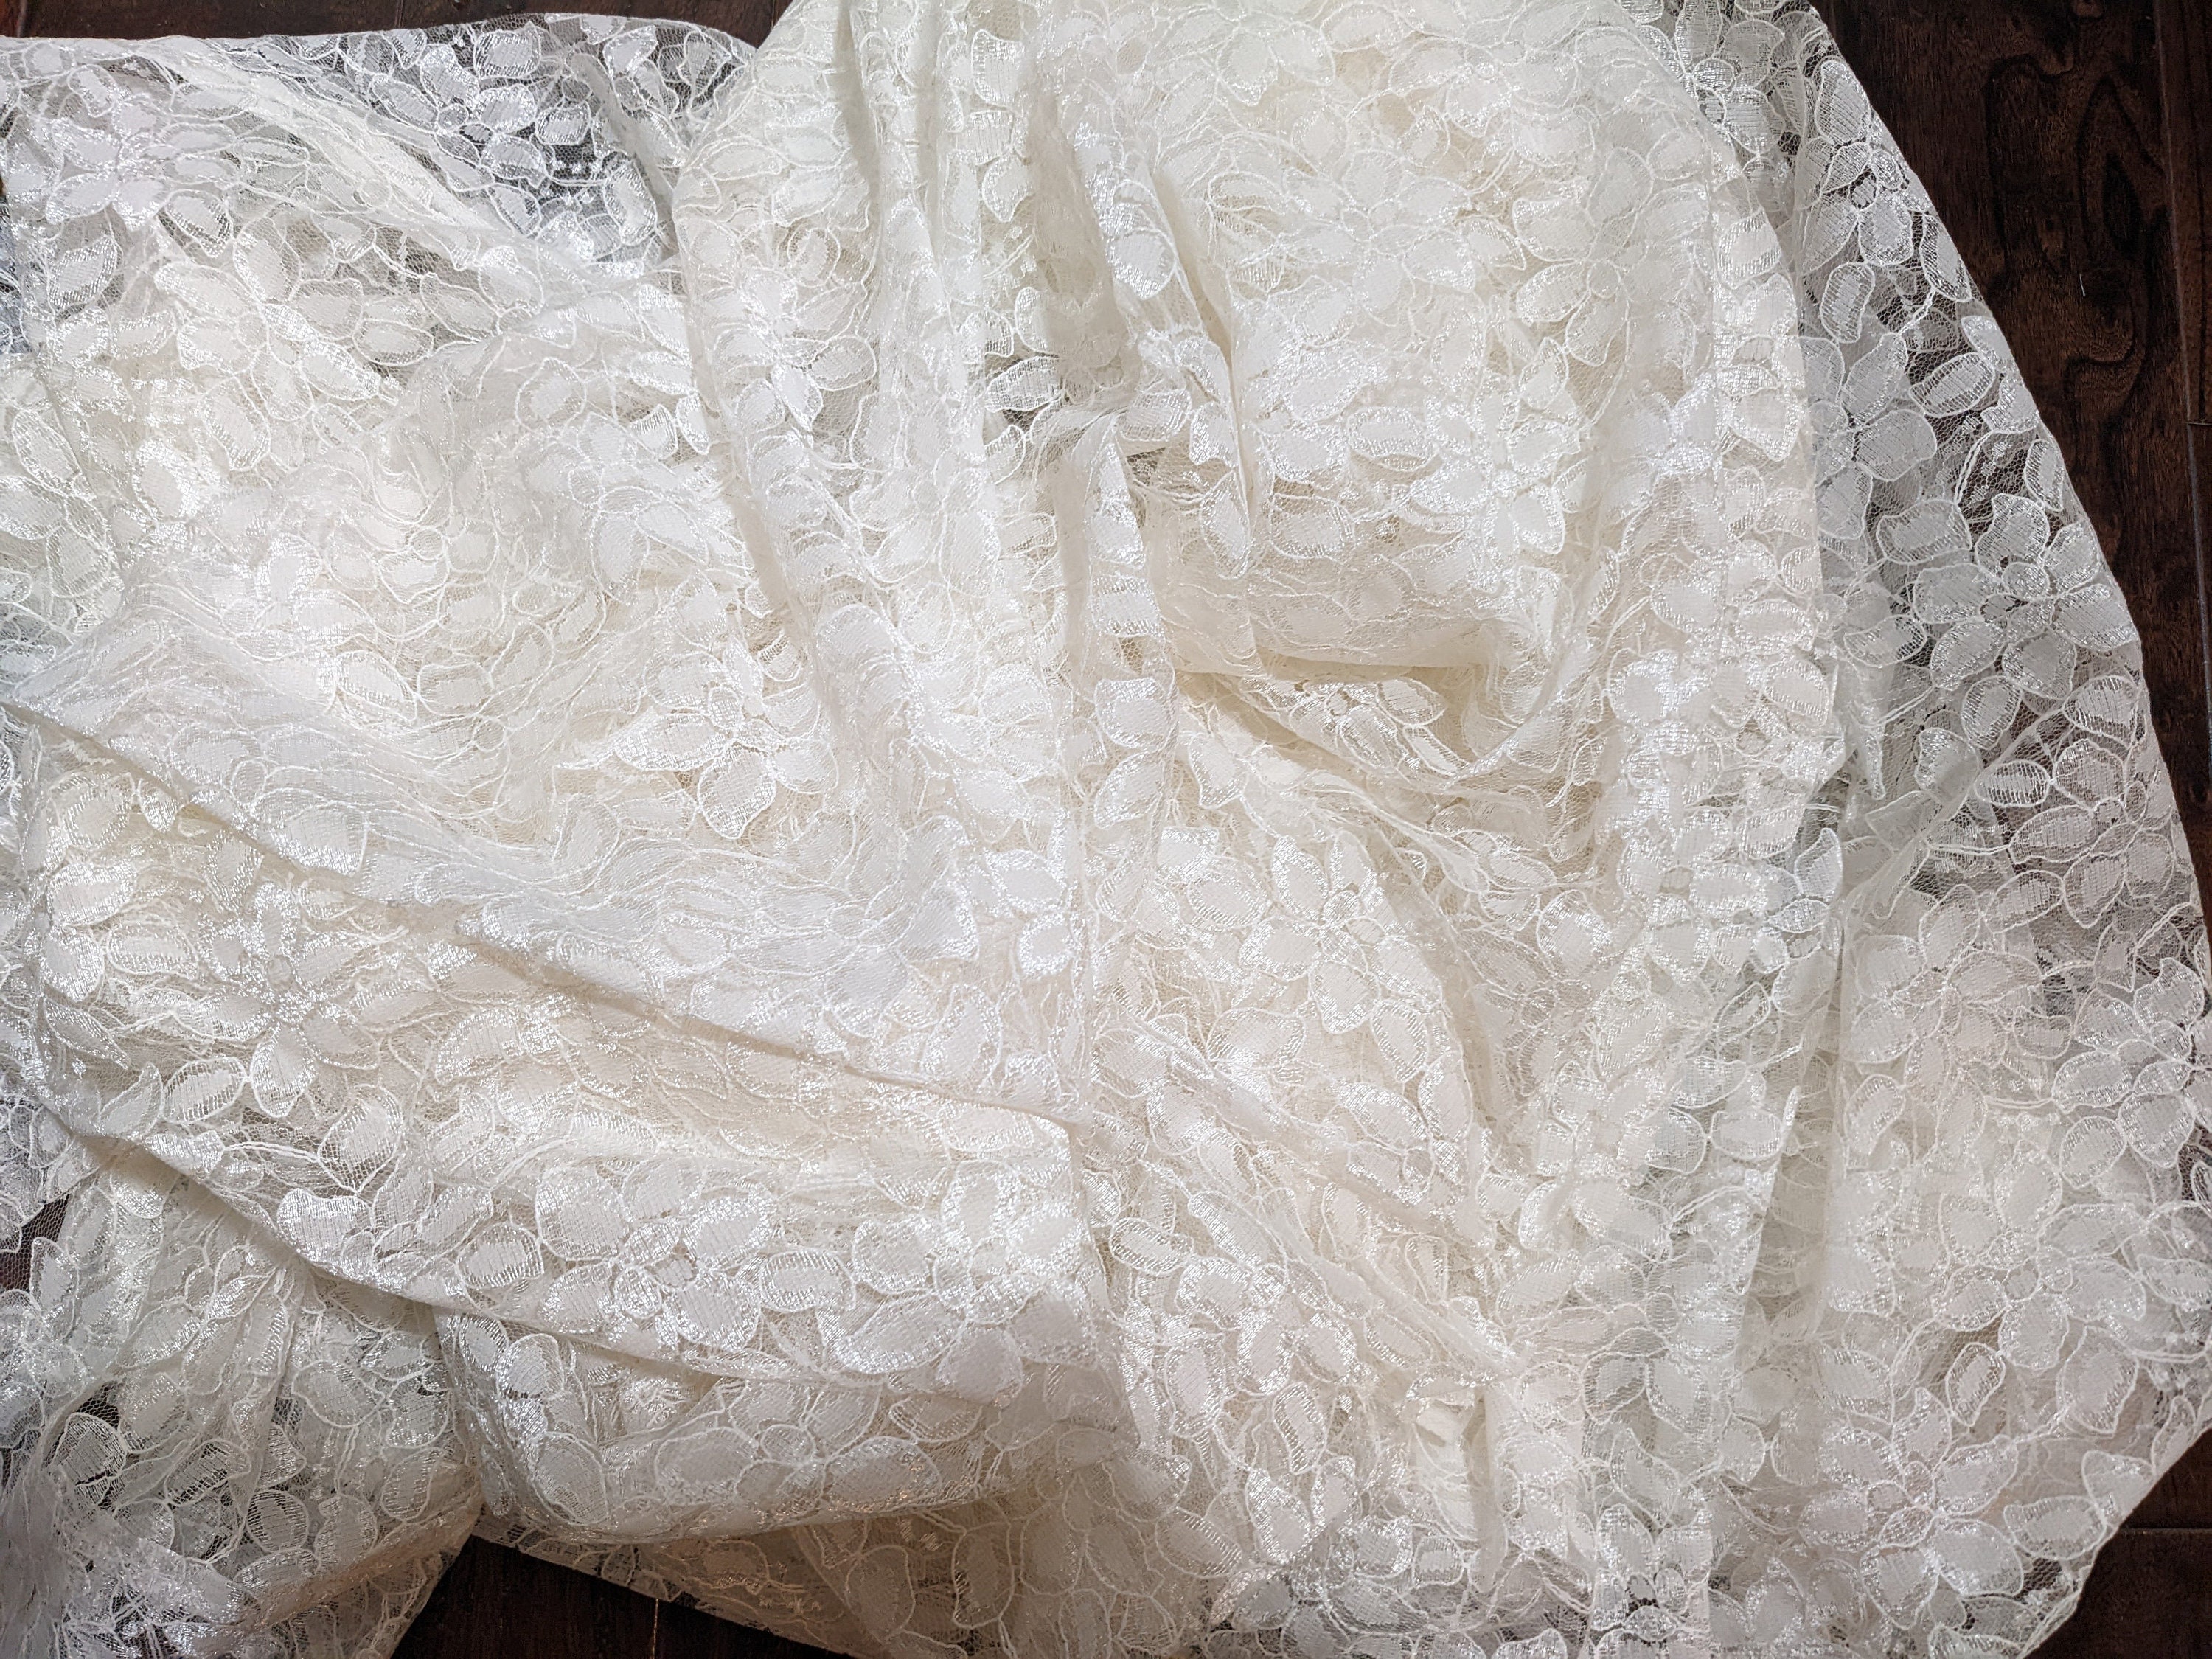 Double Panel 2 Floral Lace Sheers/curtain Off-white - Etsy